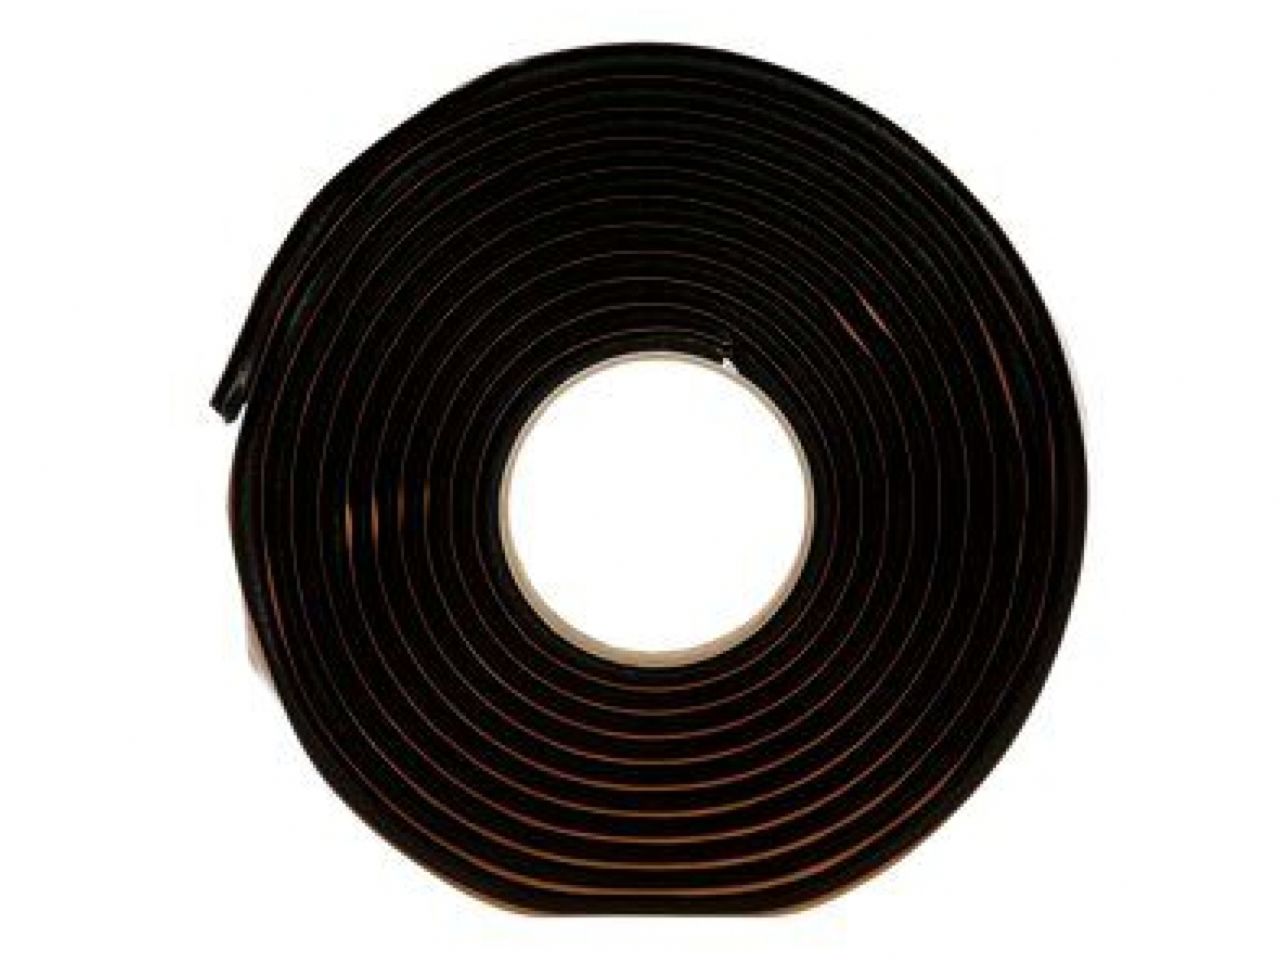 3M Windo-Weld Round Ribbon Sealer, 5/16 In x 15 ft Roll,